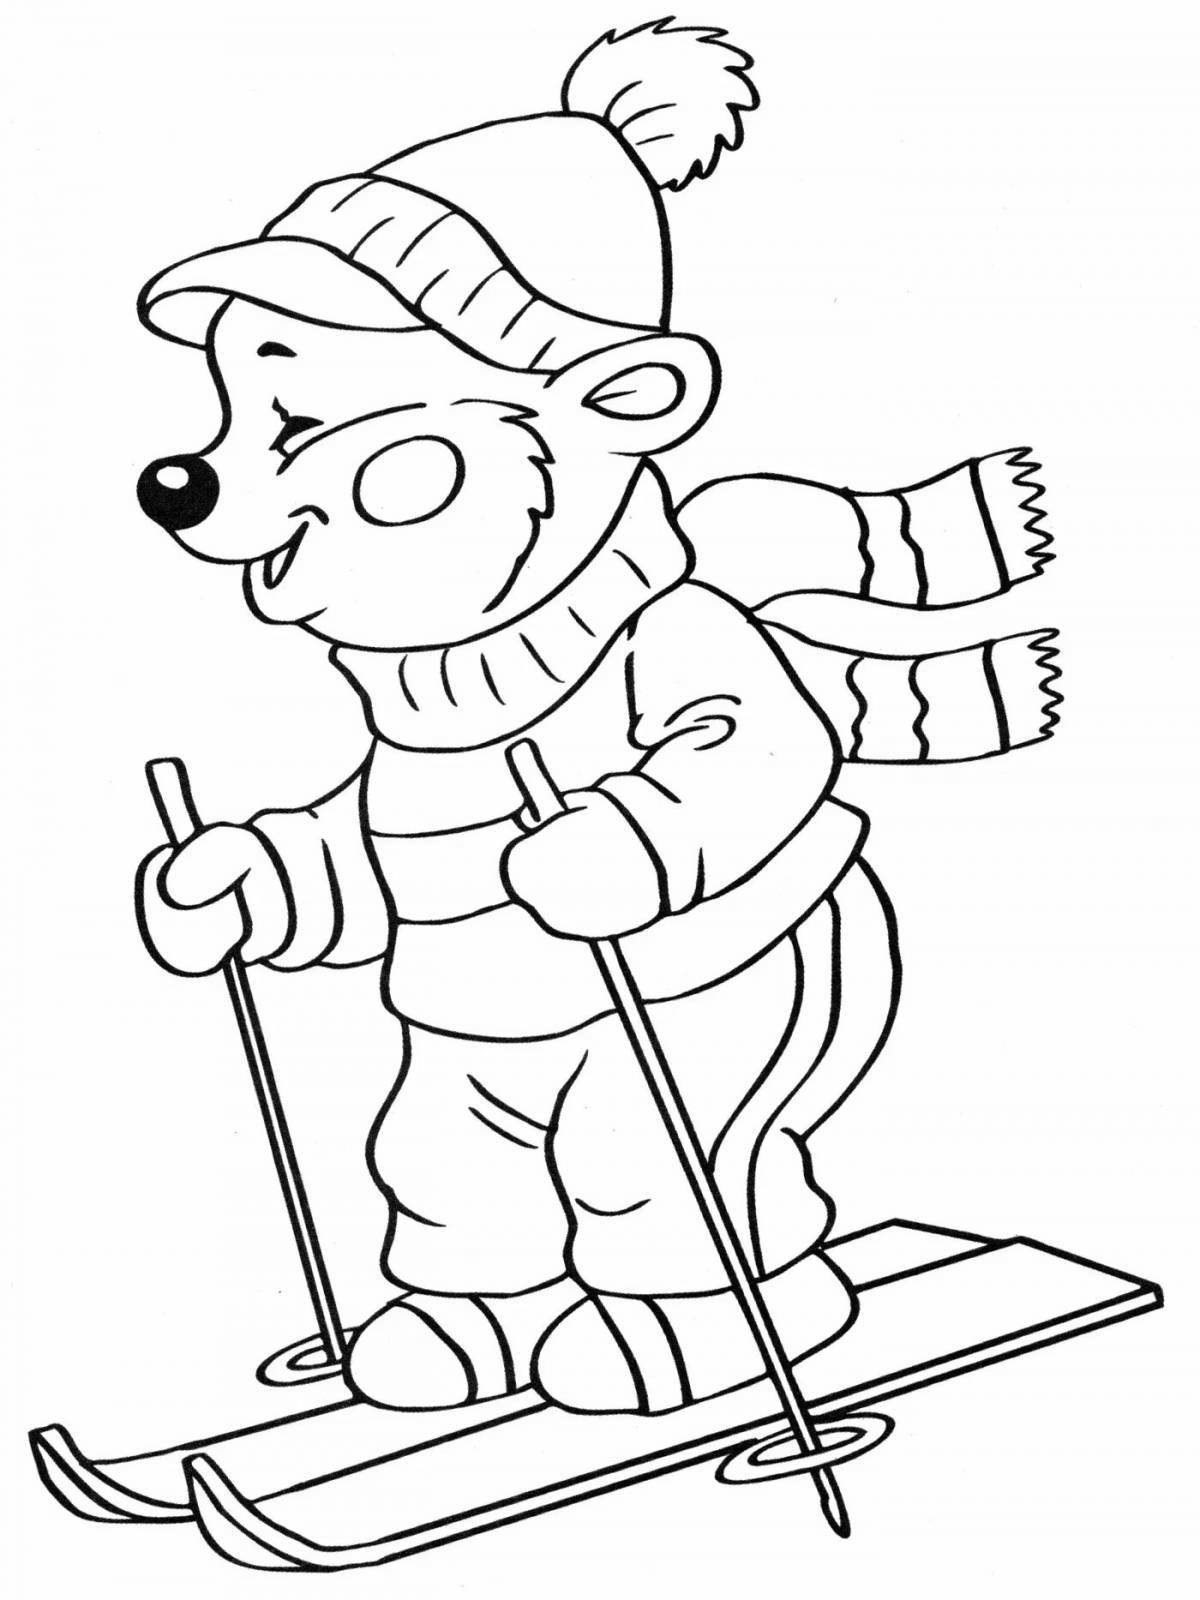 Colorful skier coloring book for kids